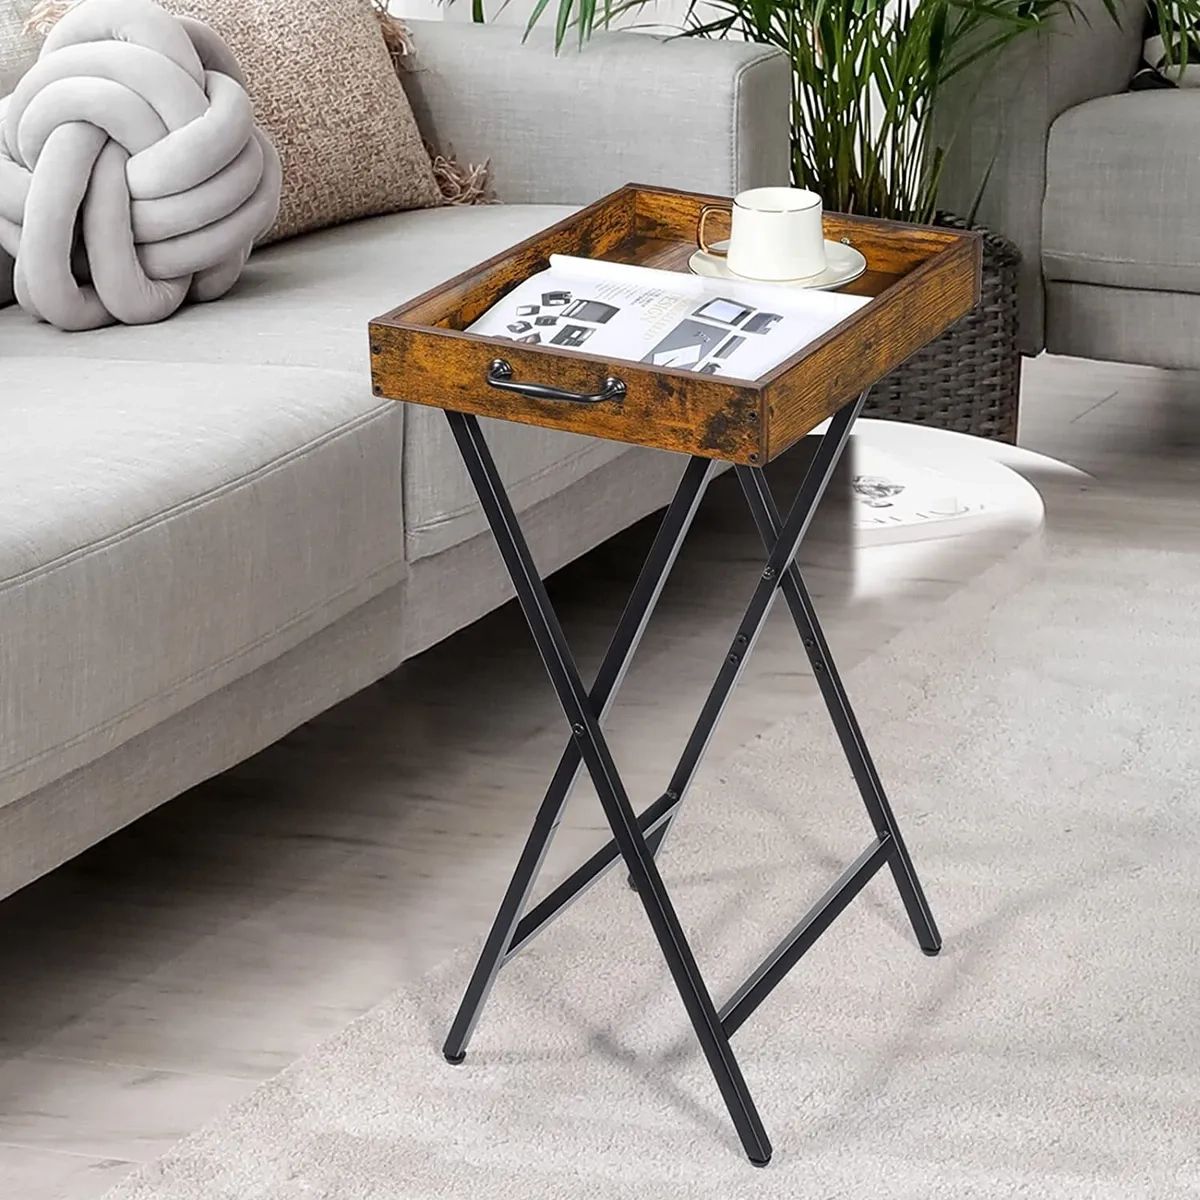 Coffee Table Snack Table W/Removable Tray Wooden End Table For Living Room  Decor | Ebay Pertaining To Detachable Tray Coffee Tables (View 10 of 15)